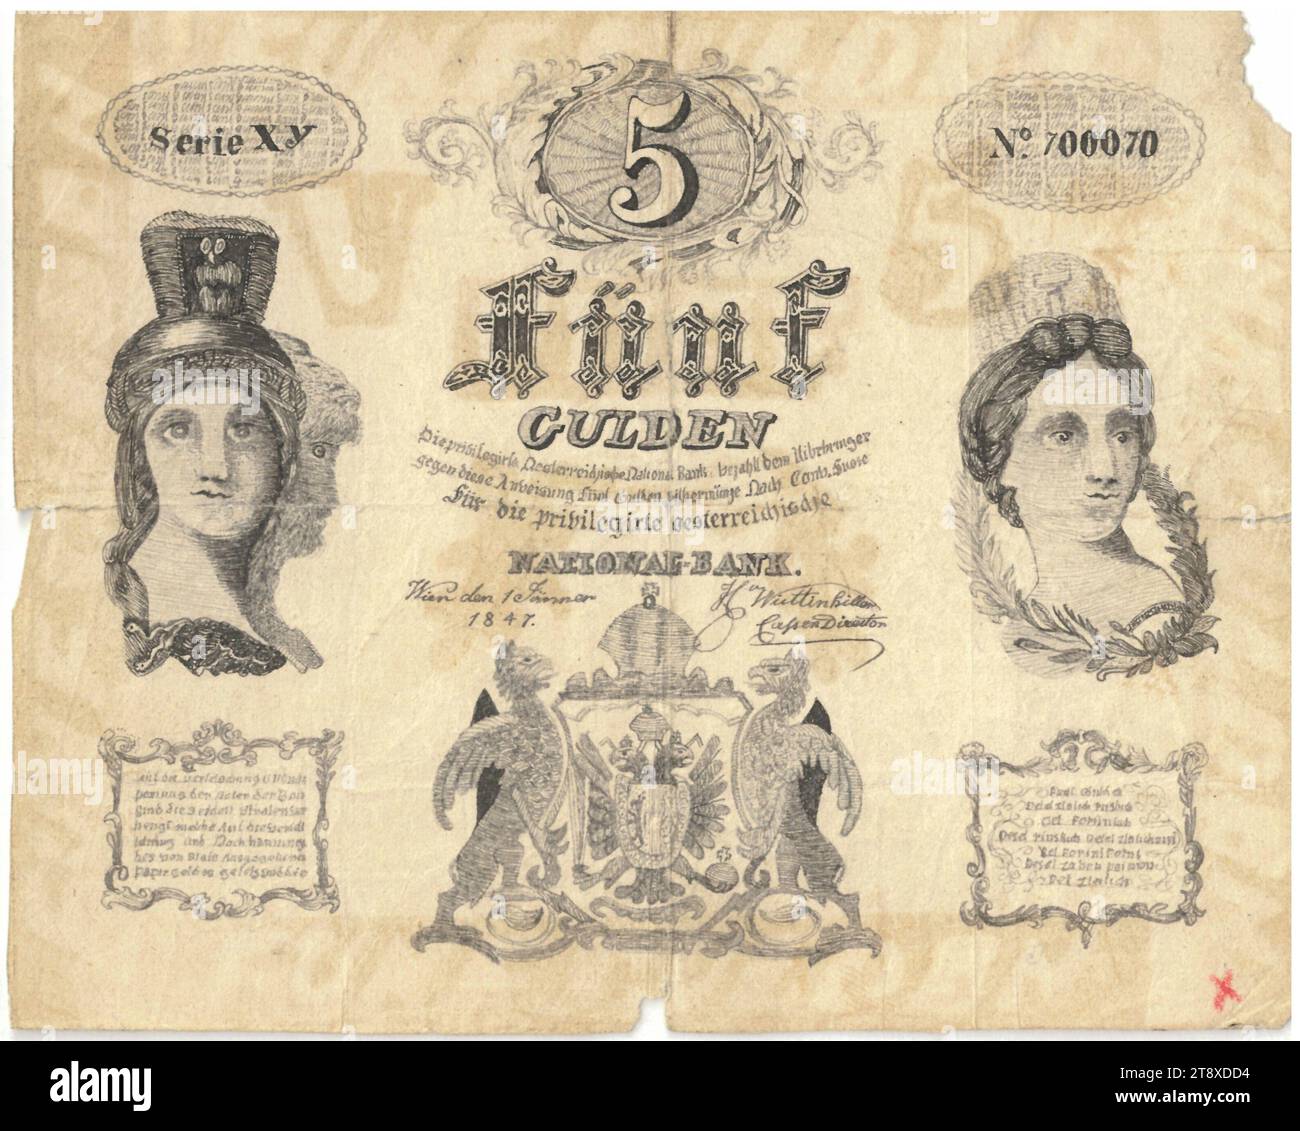 Instruction (forgery), 5 florins, Privilegierte Österreichische National-Bank, mint authority, Date after 01.01.1847, paper, printing, width 135 mm, height 107 mm, Mint, Vienna, Mint territory, Austria, Empire (1804-1867), Finance, counterfeit, forgery, coat of arms (as symbol of the state, etc.), woman, helmet, bank-note, money, The Vienna Collection Stock Photo